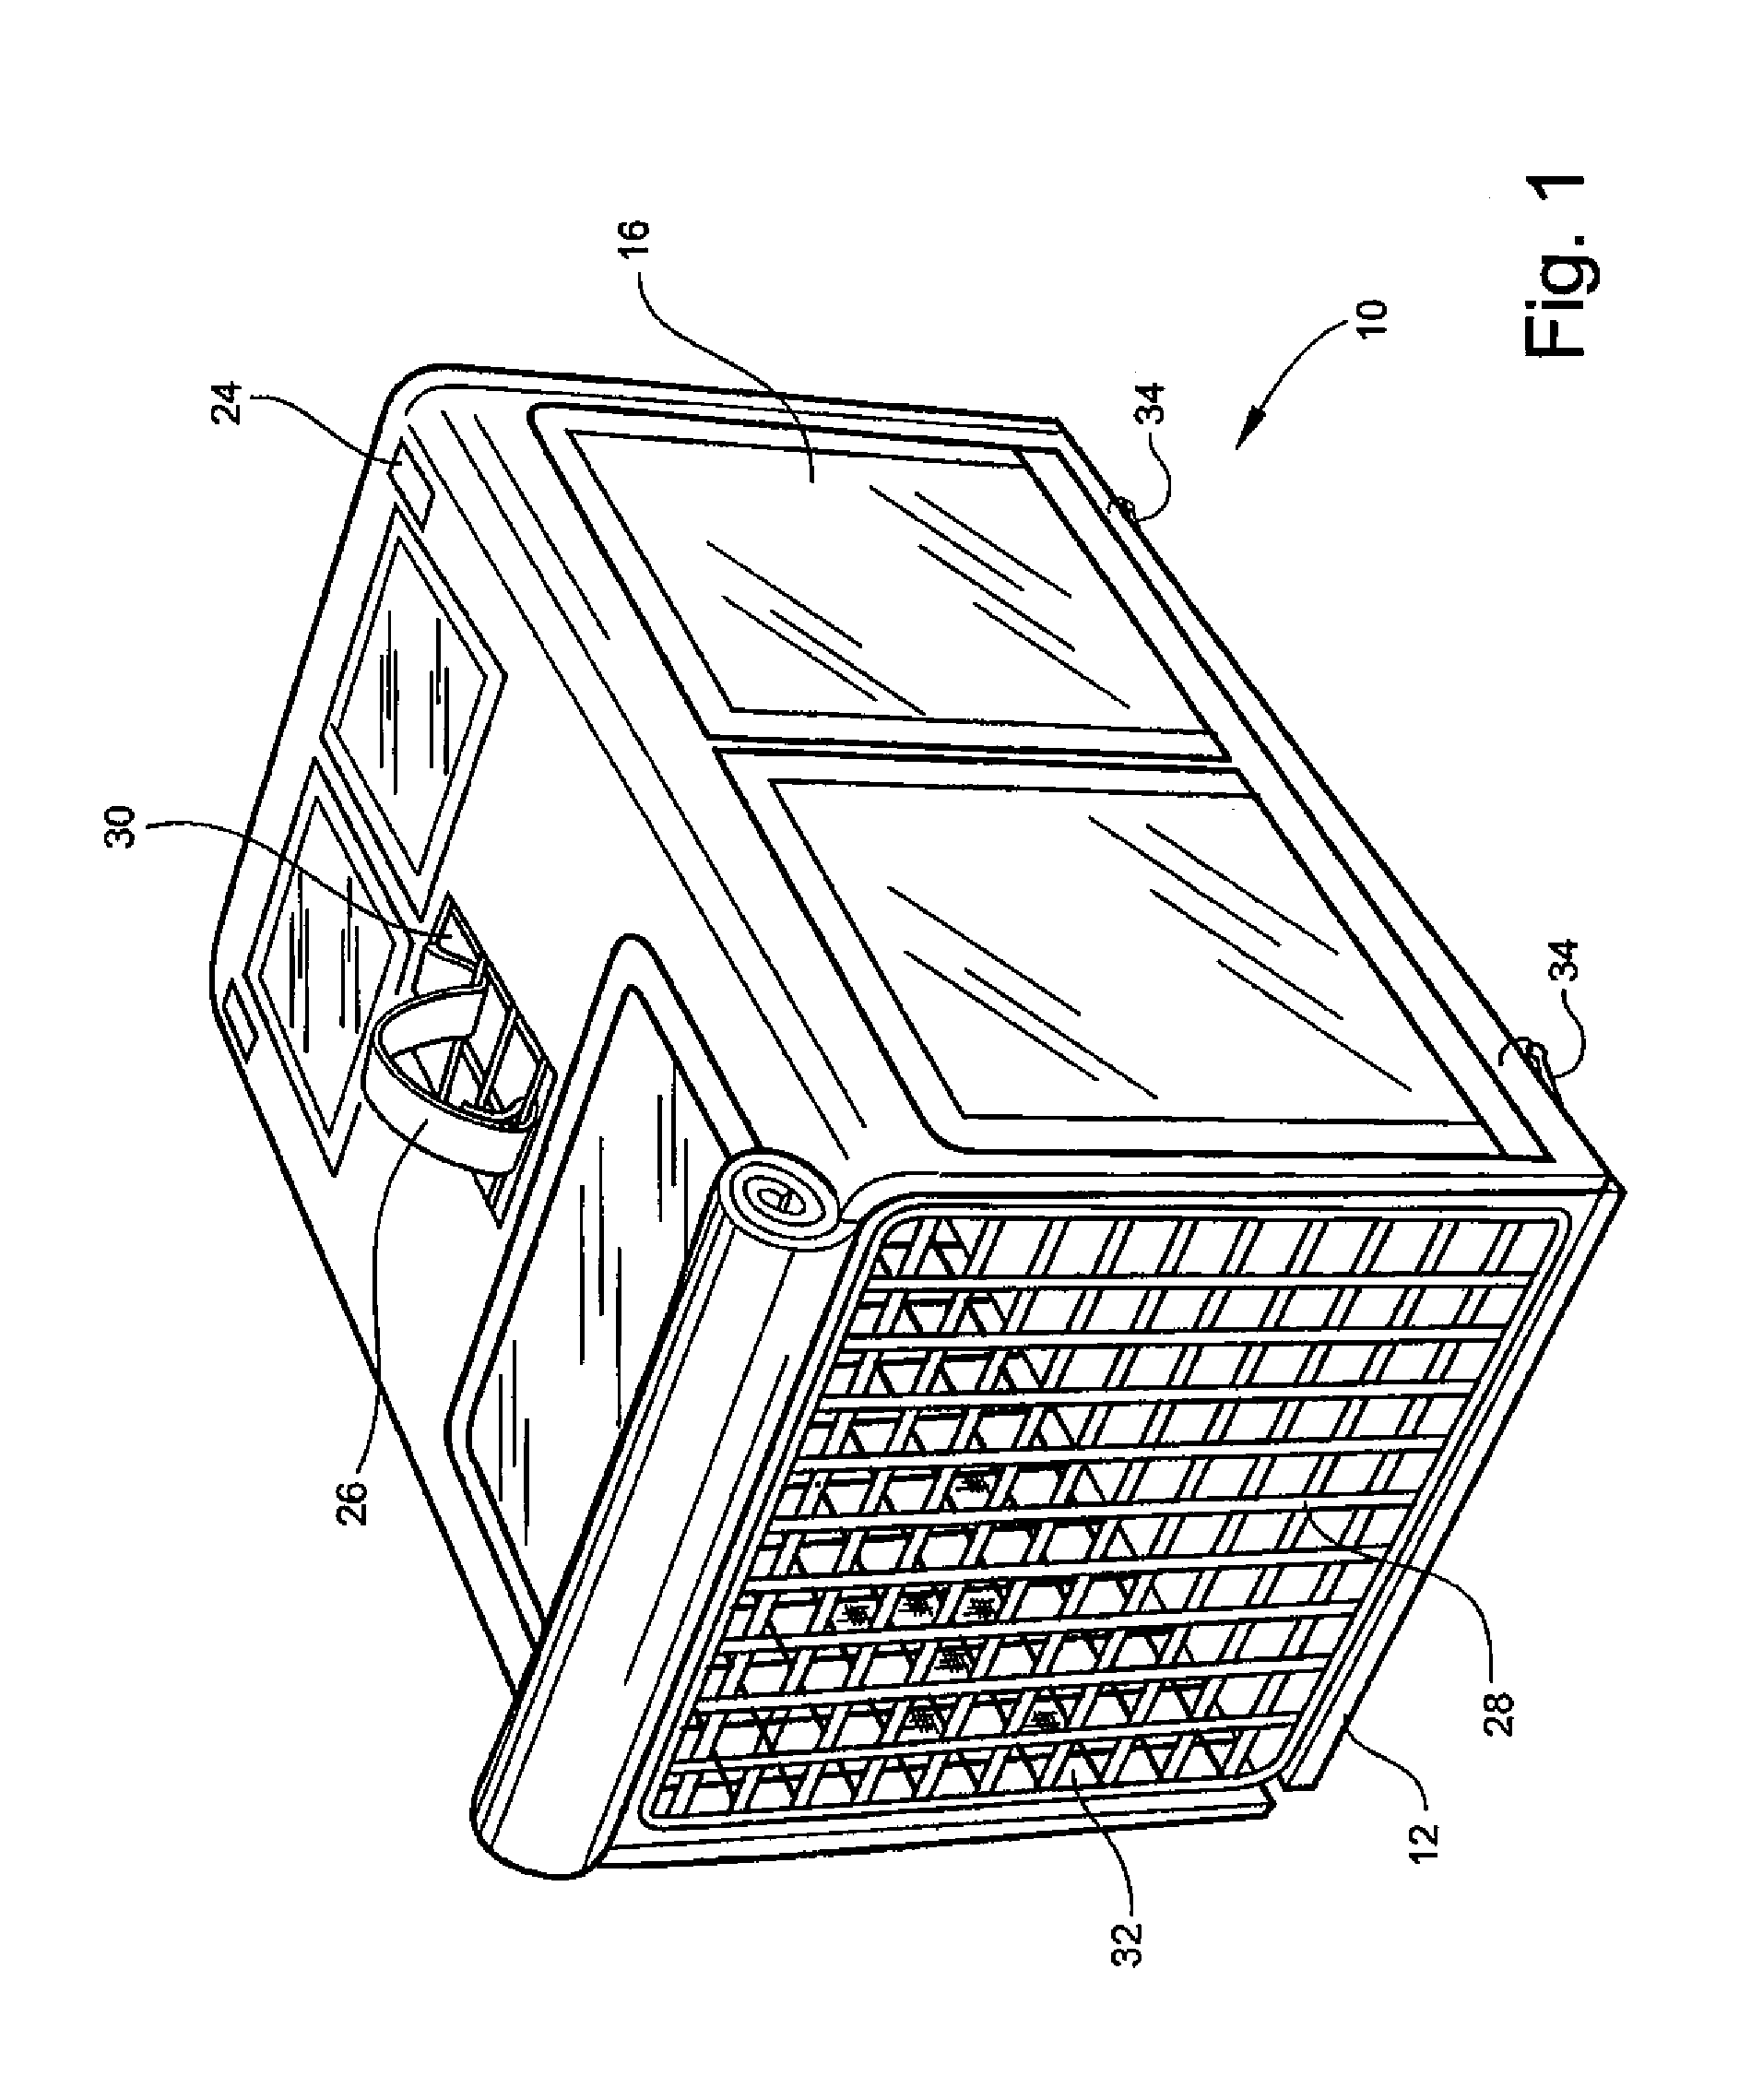 Cover for a pet carrier